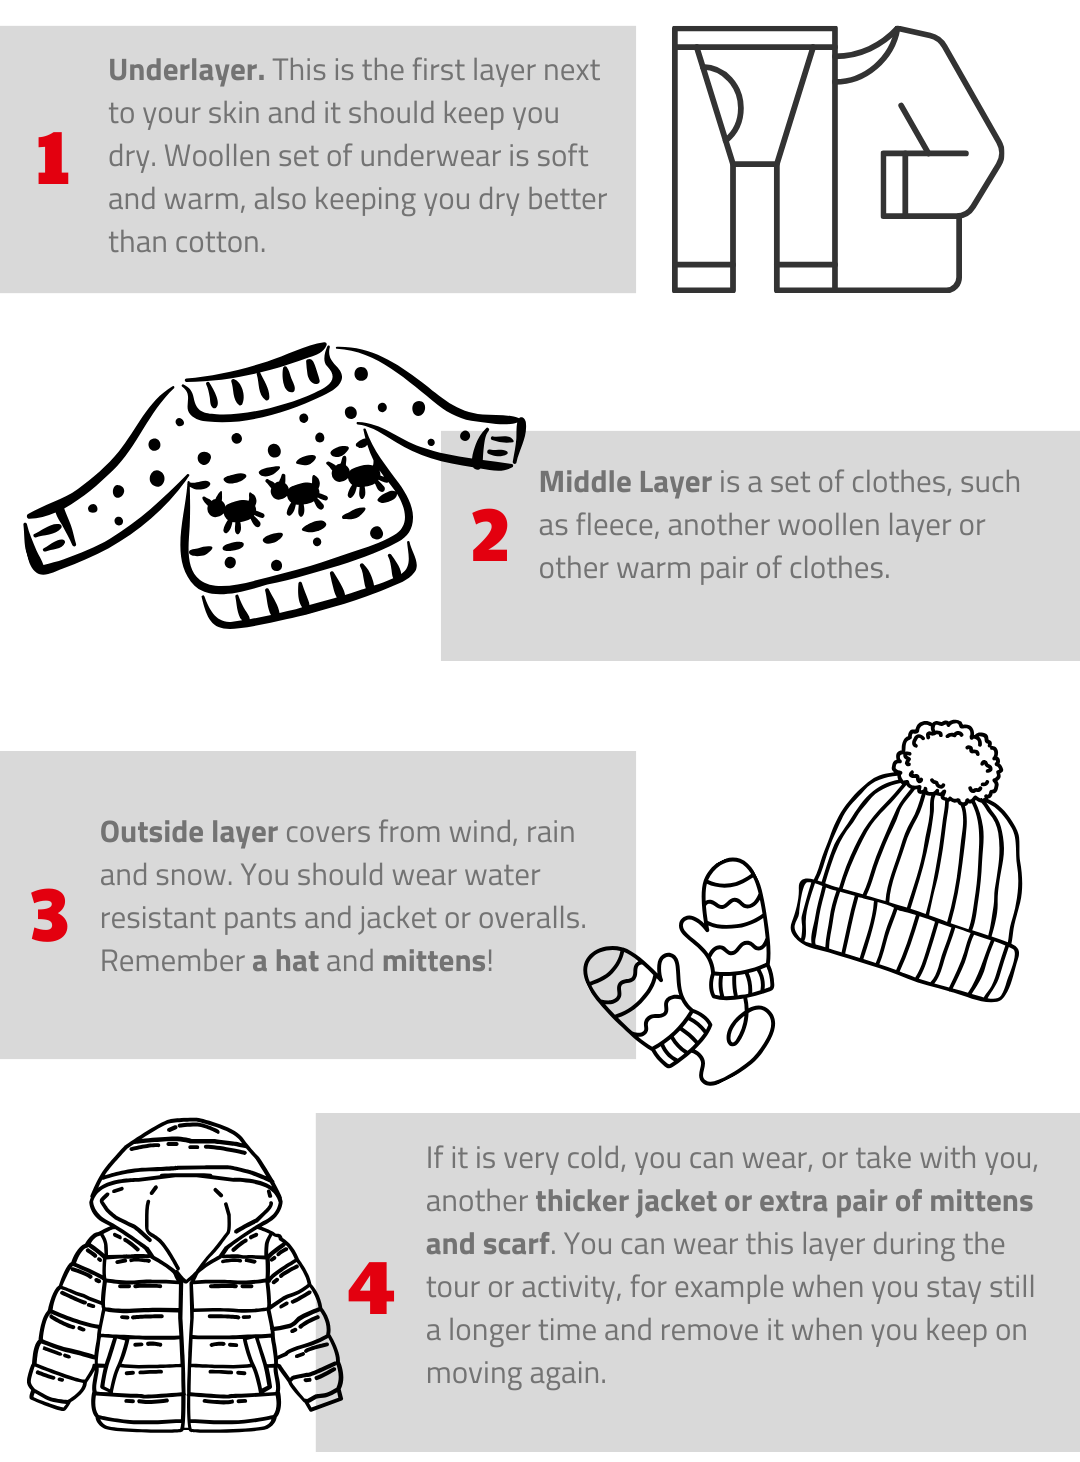 How To Layer Clothes For Cold Weather - the gray details